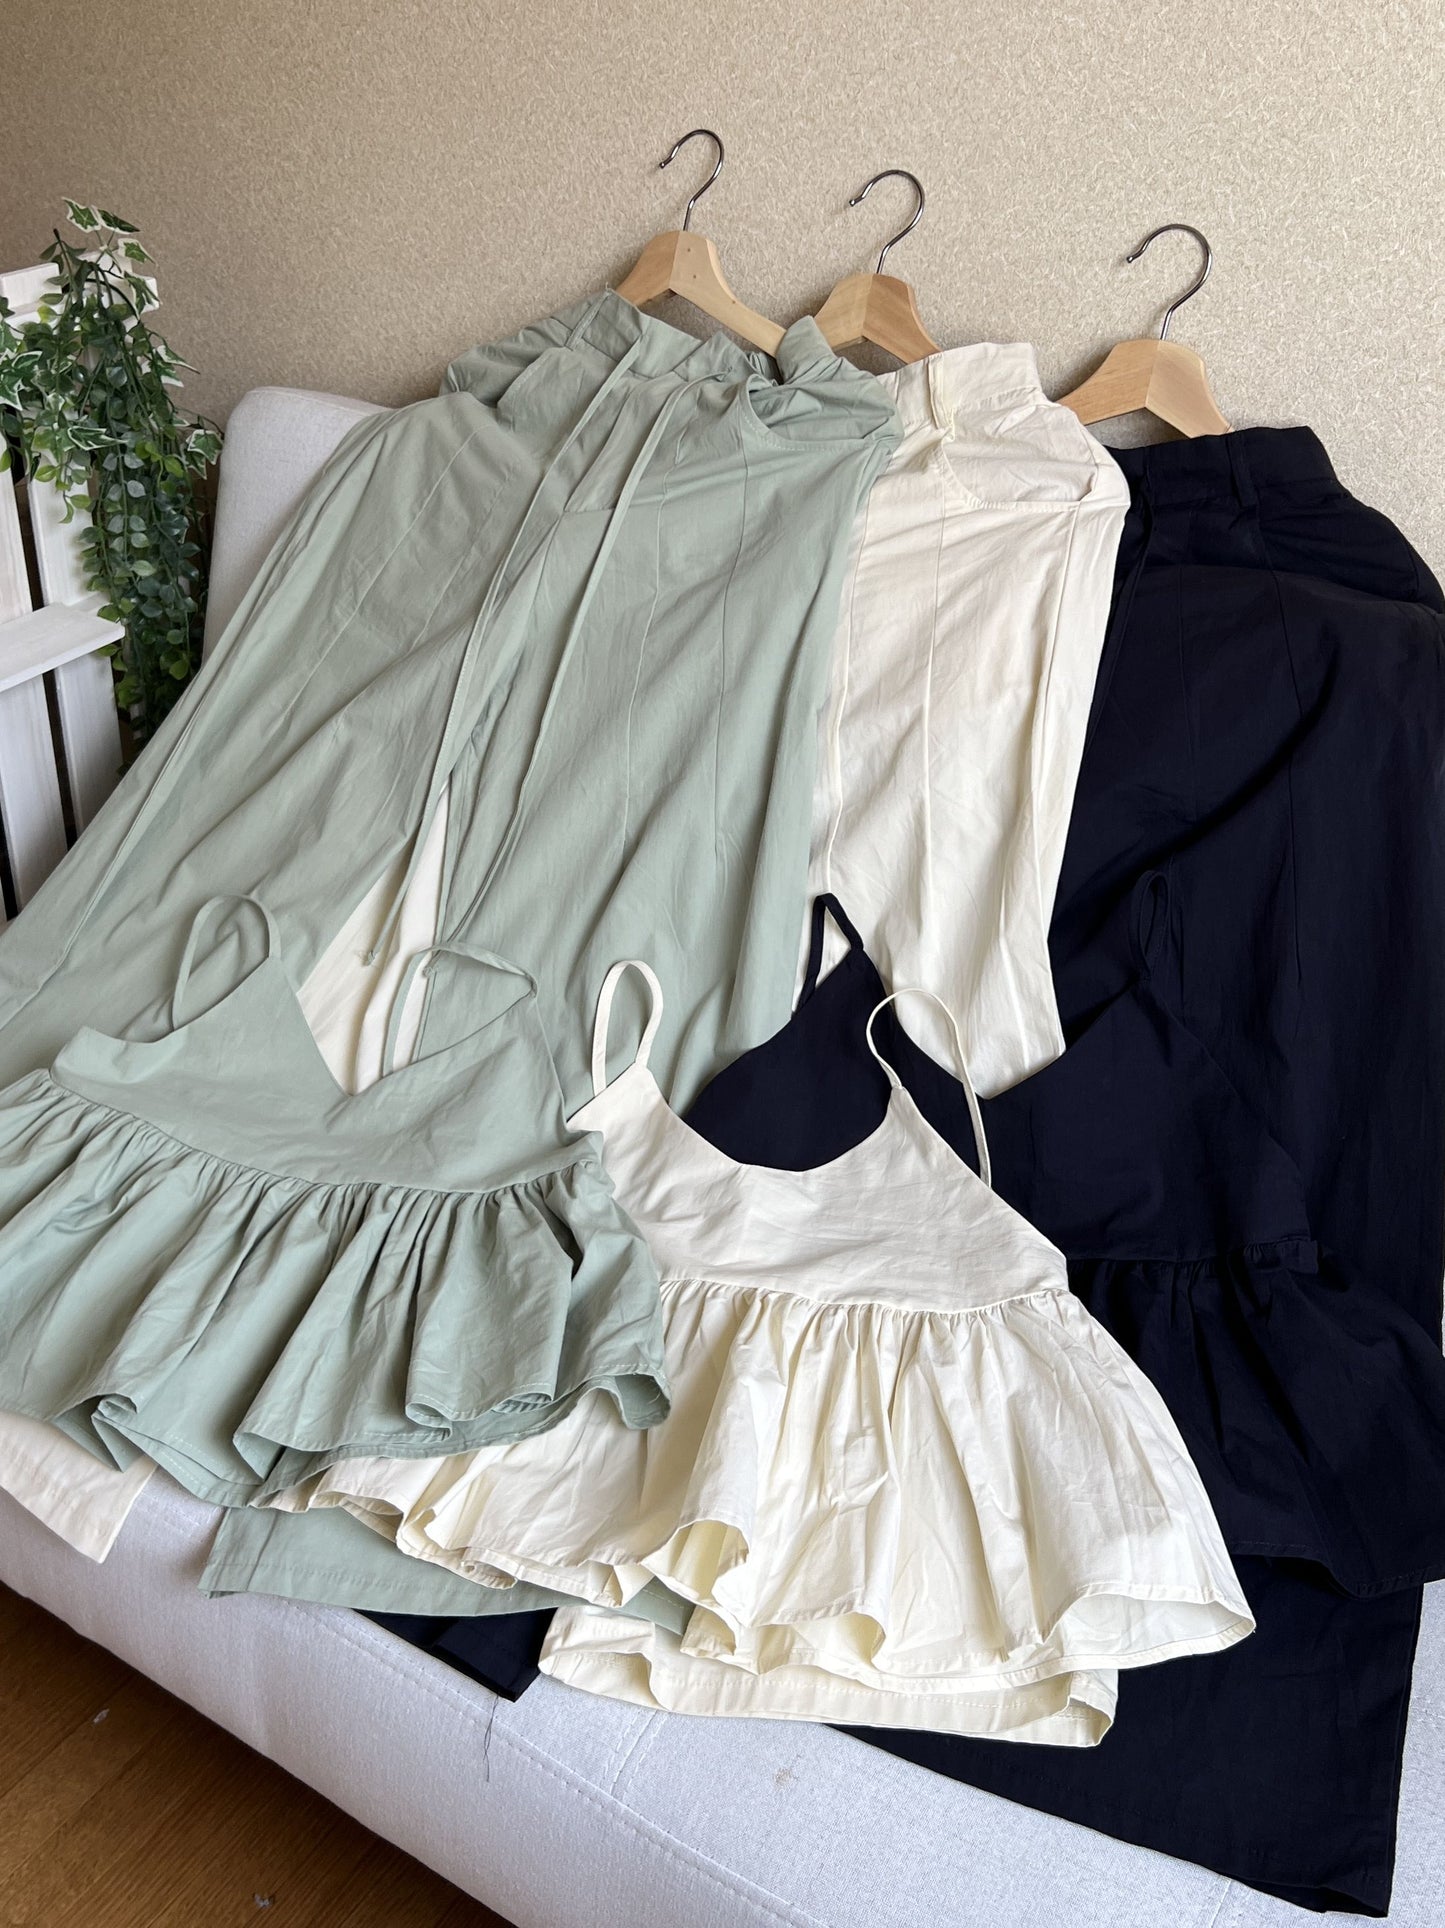 Gather cami with Wide pants セットアップ